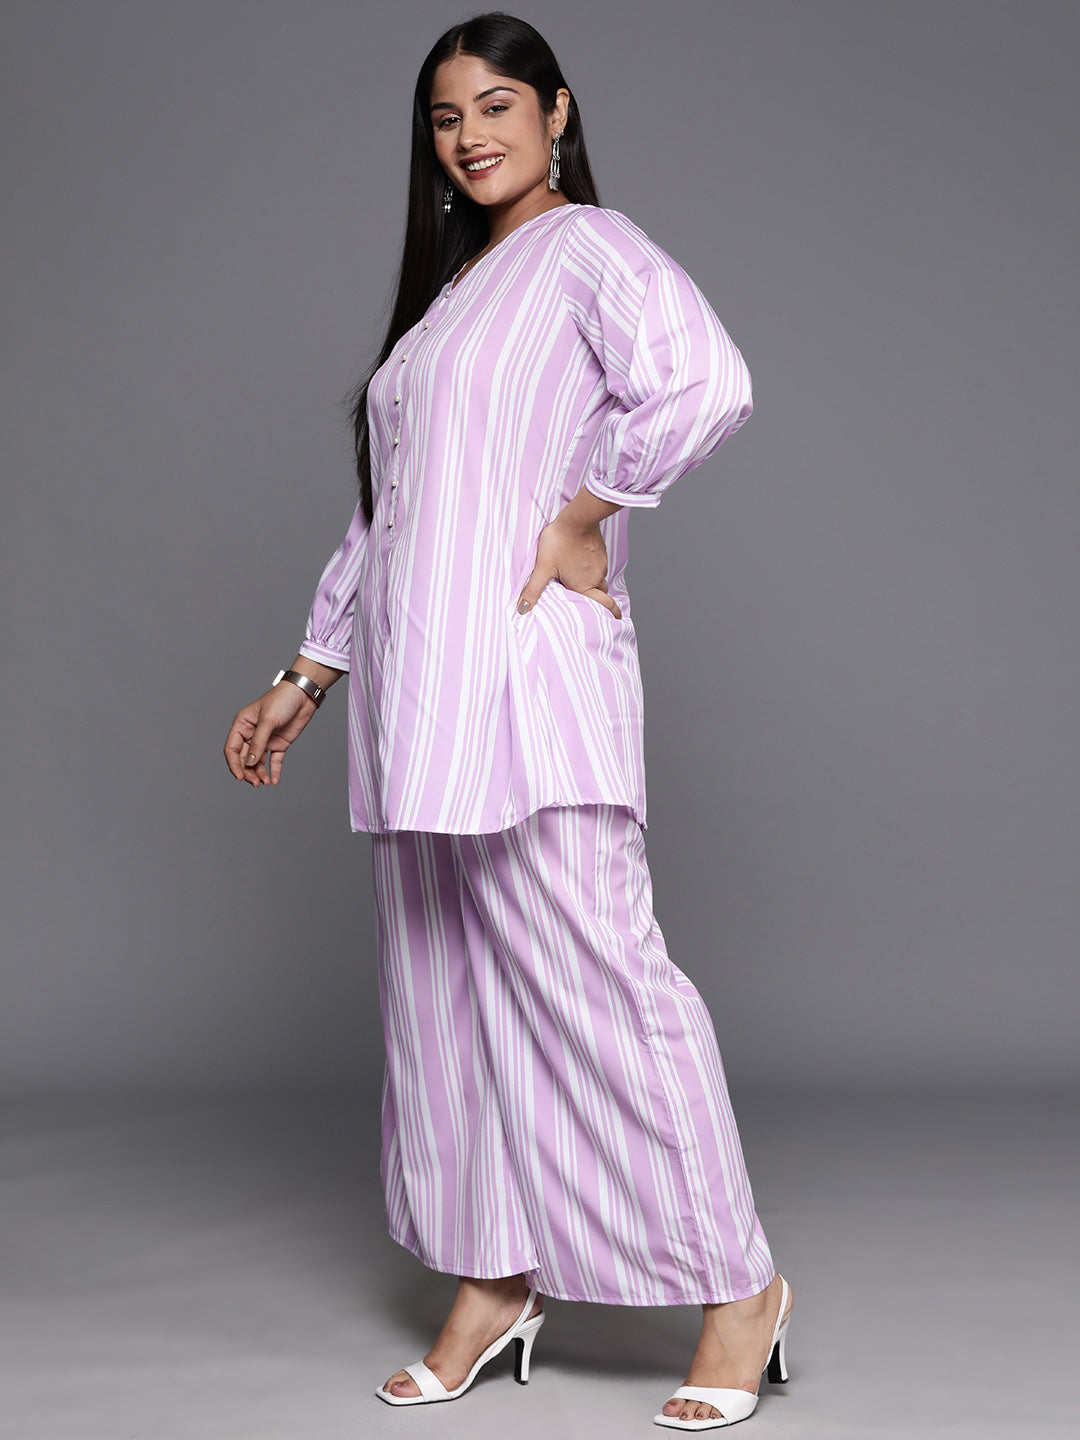 Lavender & White Plus Size Striped Tunic with Palazzos